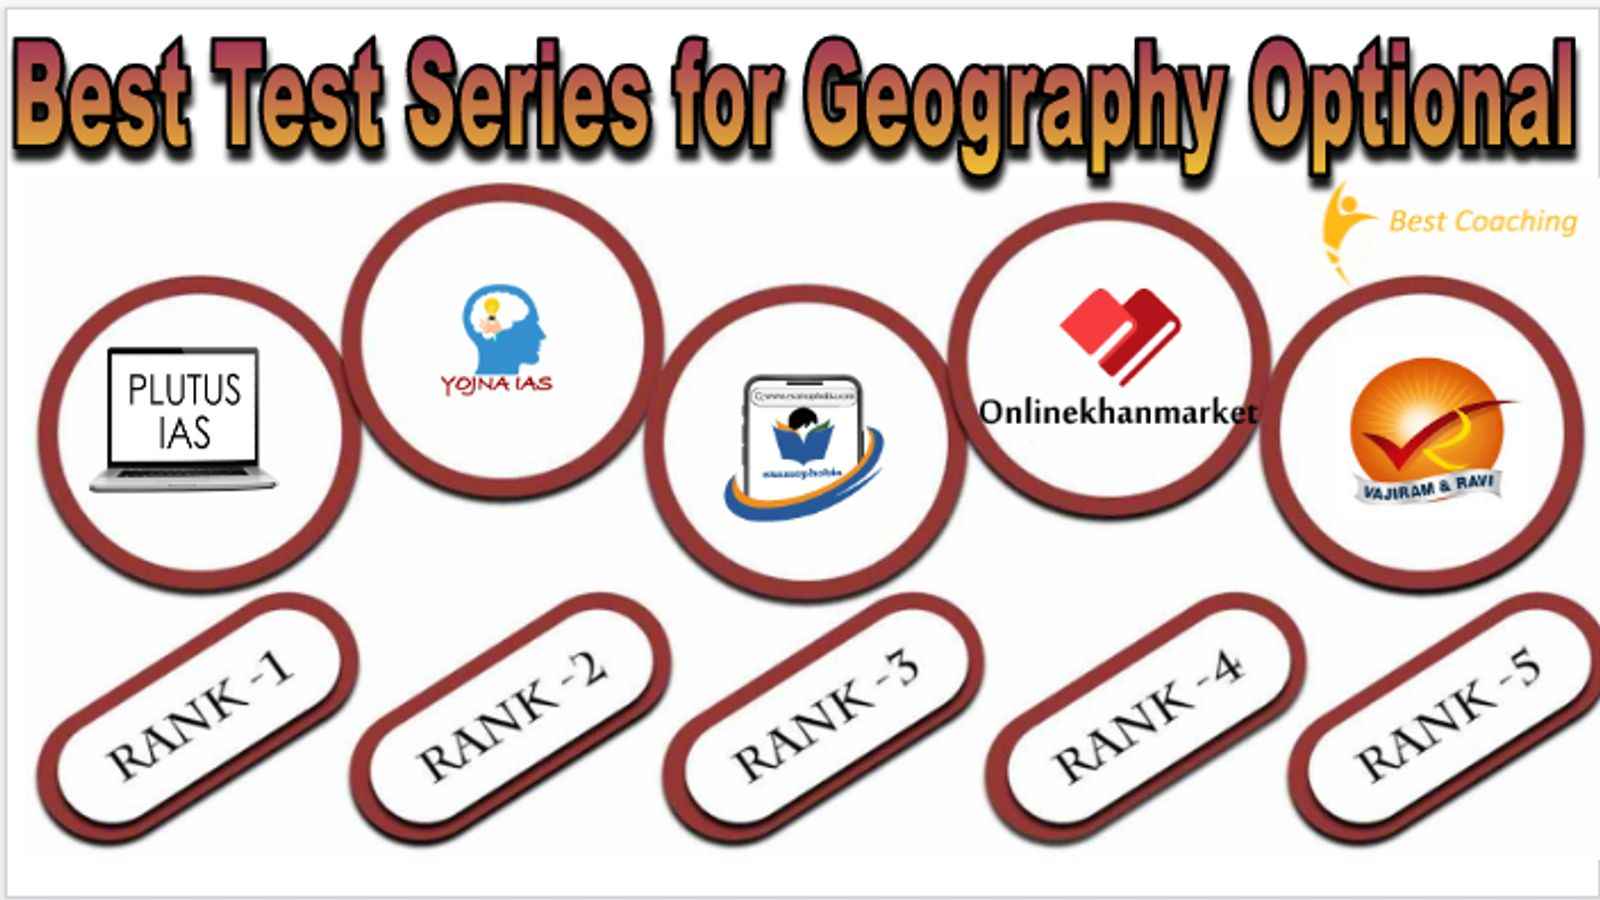 Best Test Series for Geography Optional